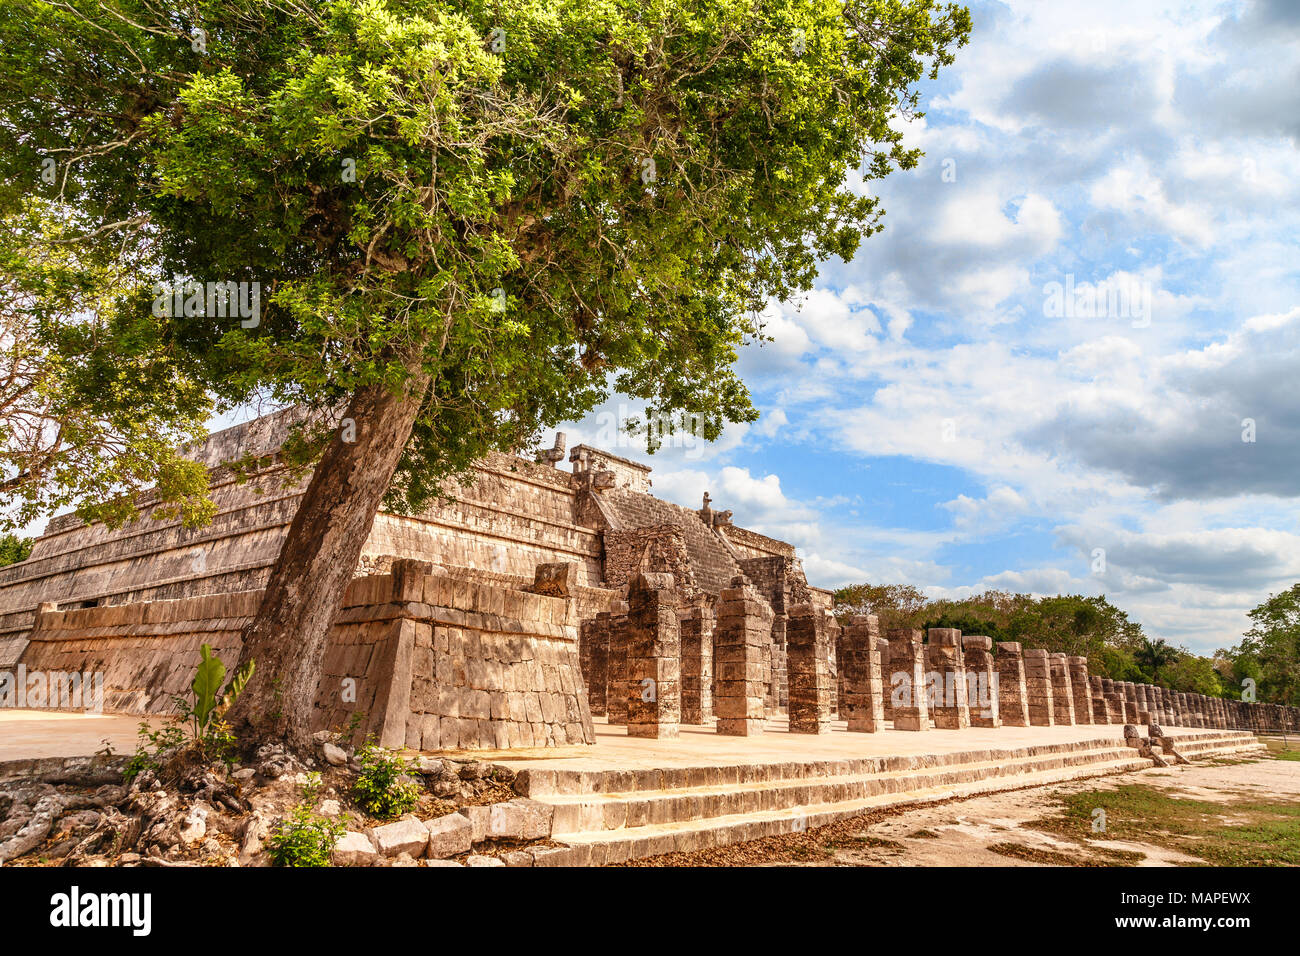 Group of thousand columns complex and tree in foreground, Chichen Itza archaeological site, Yucatan, Mexico Stock Photo